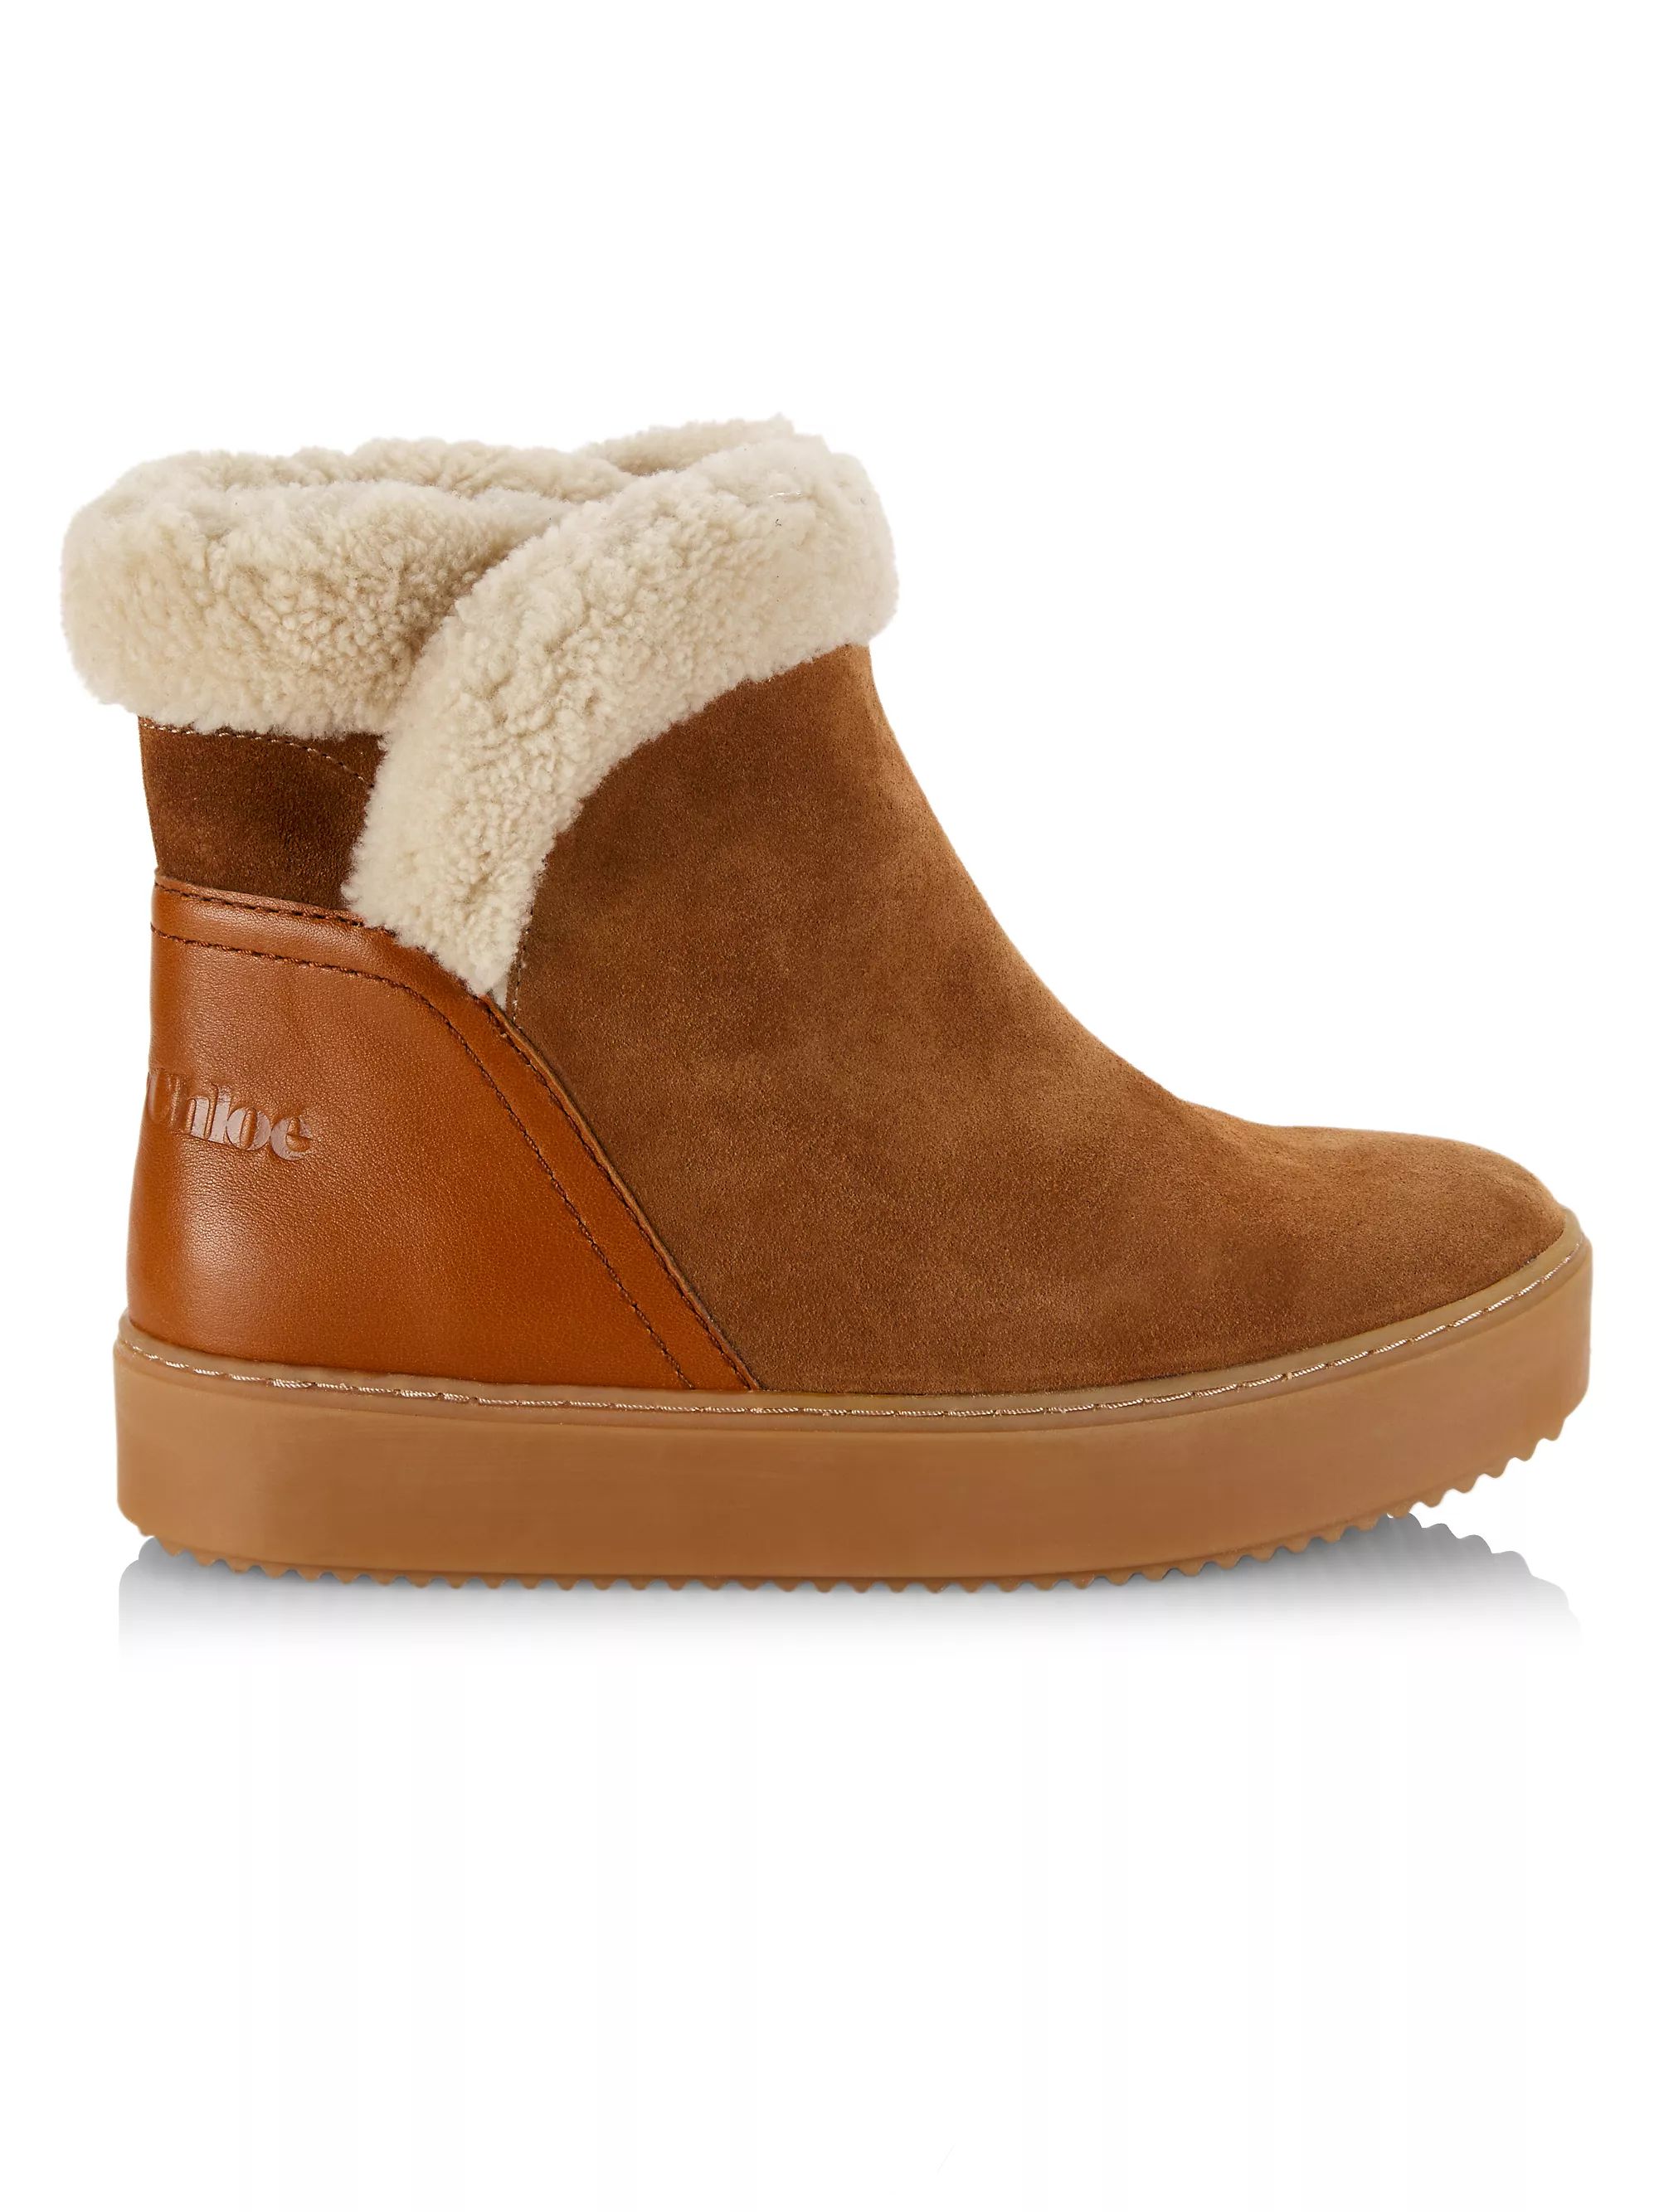 Juliet Shearling-Trimmed Boots | Saks Fifth Avenue